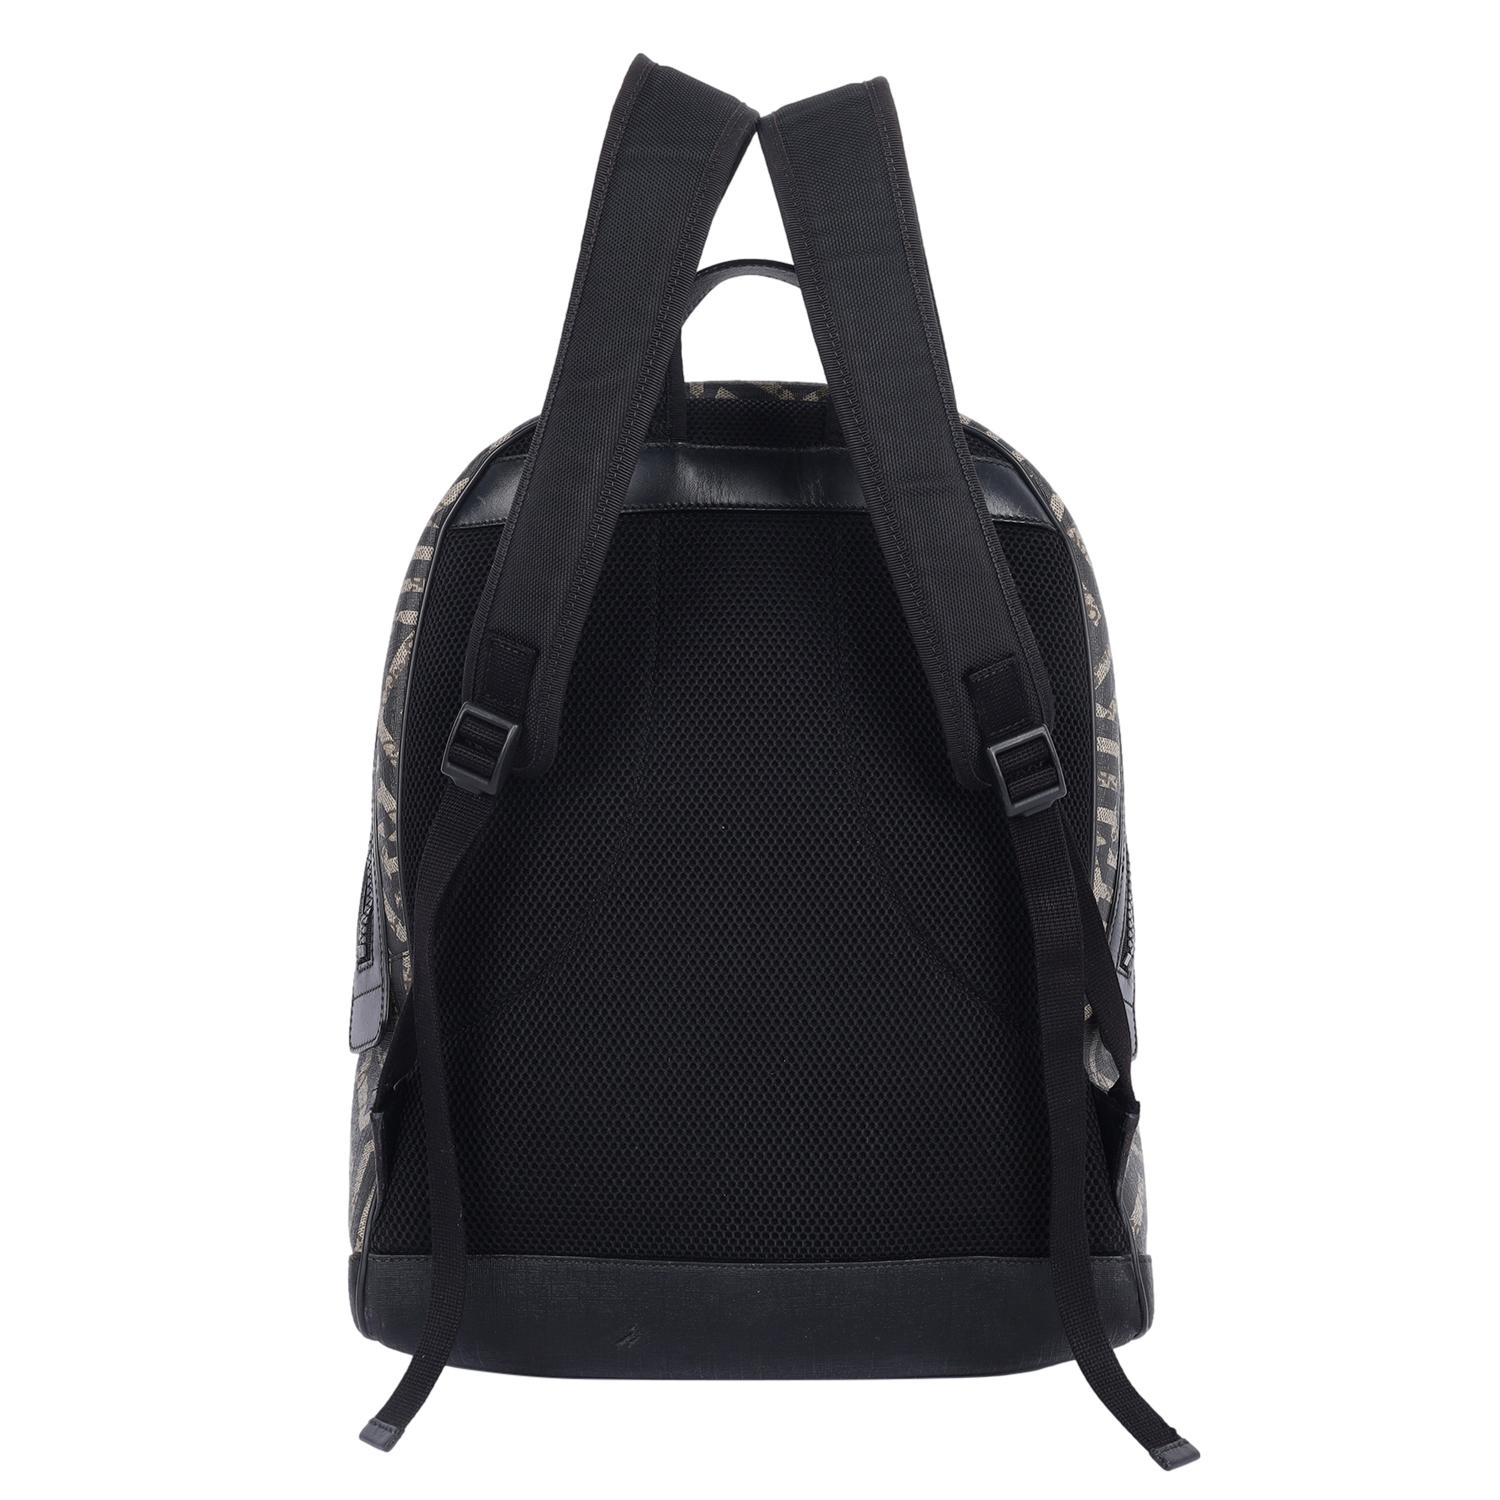 Authentic, pre-loved Gucci GG Supreme Monogram Caleido Backpack in Black. This stylish backpack features Gucci GG monogram coated canvas, front zipper pocket, leather top handle, nylon padded shoulder straps, large brown microfiber interior with